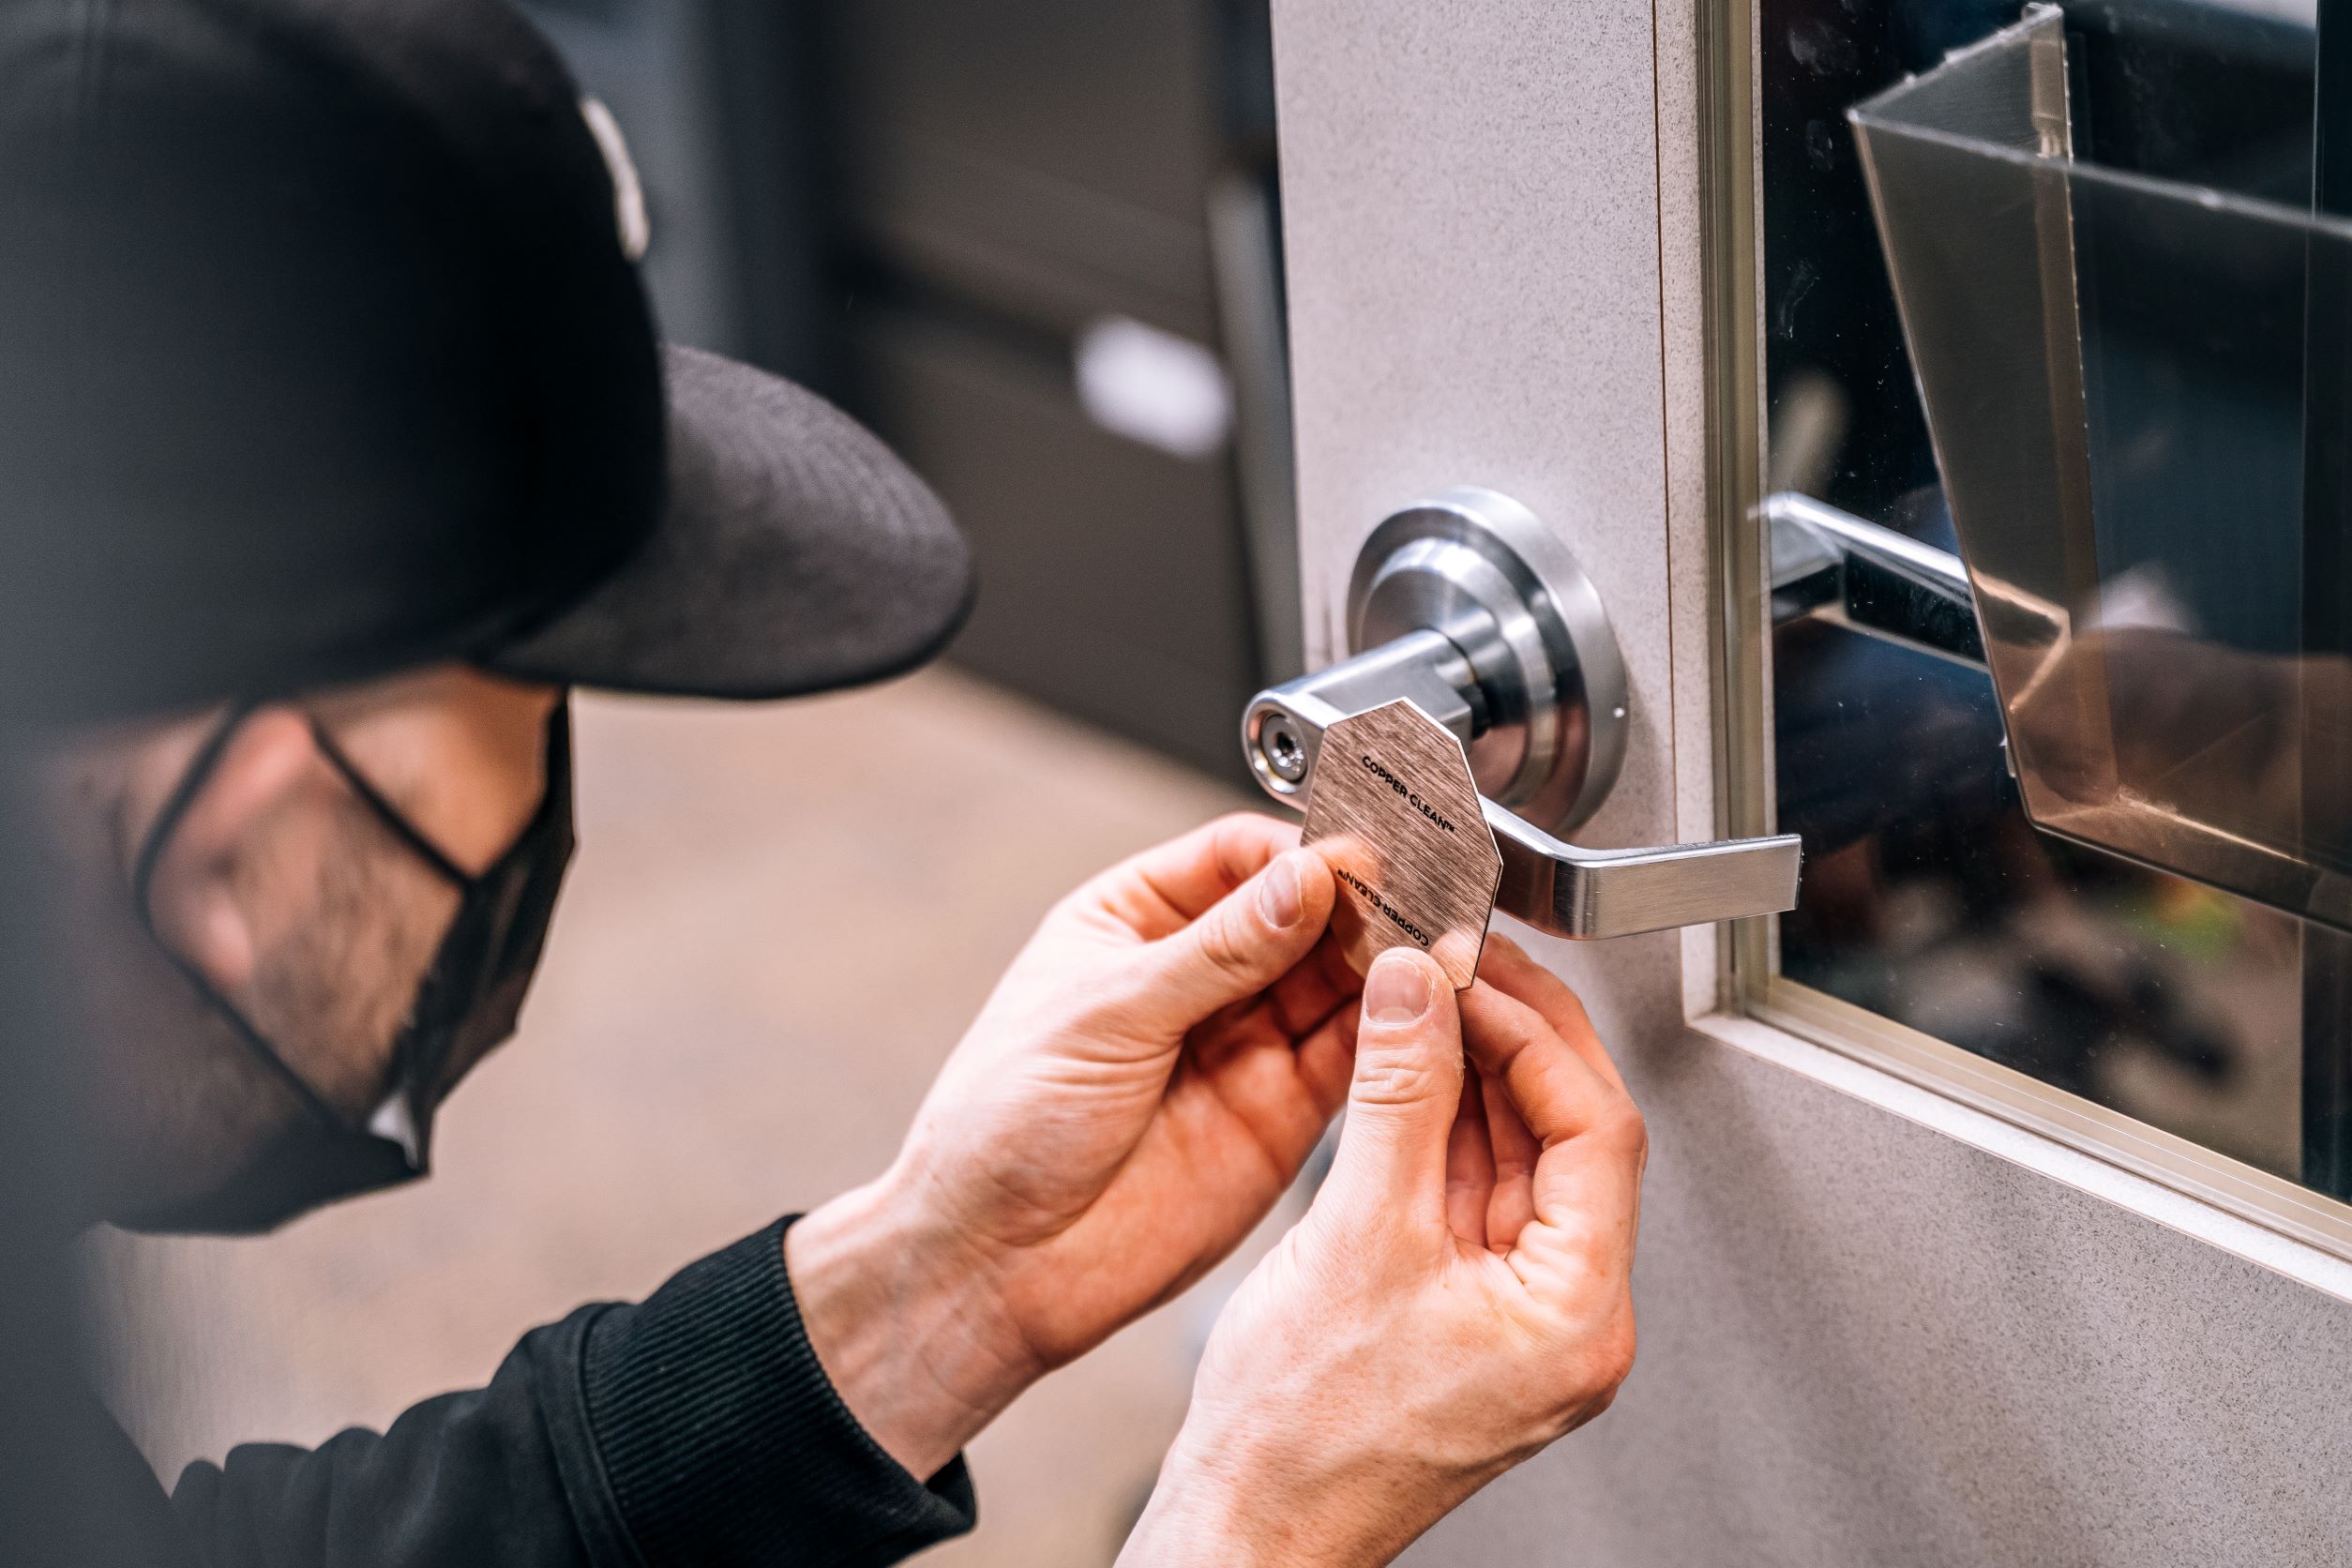 A man mearing a mask and a baseball hat carefully lines up a copper patch before sticking it to a door handle.